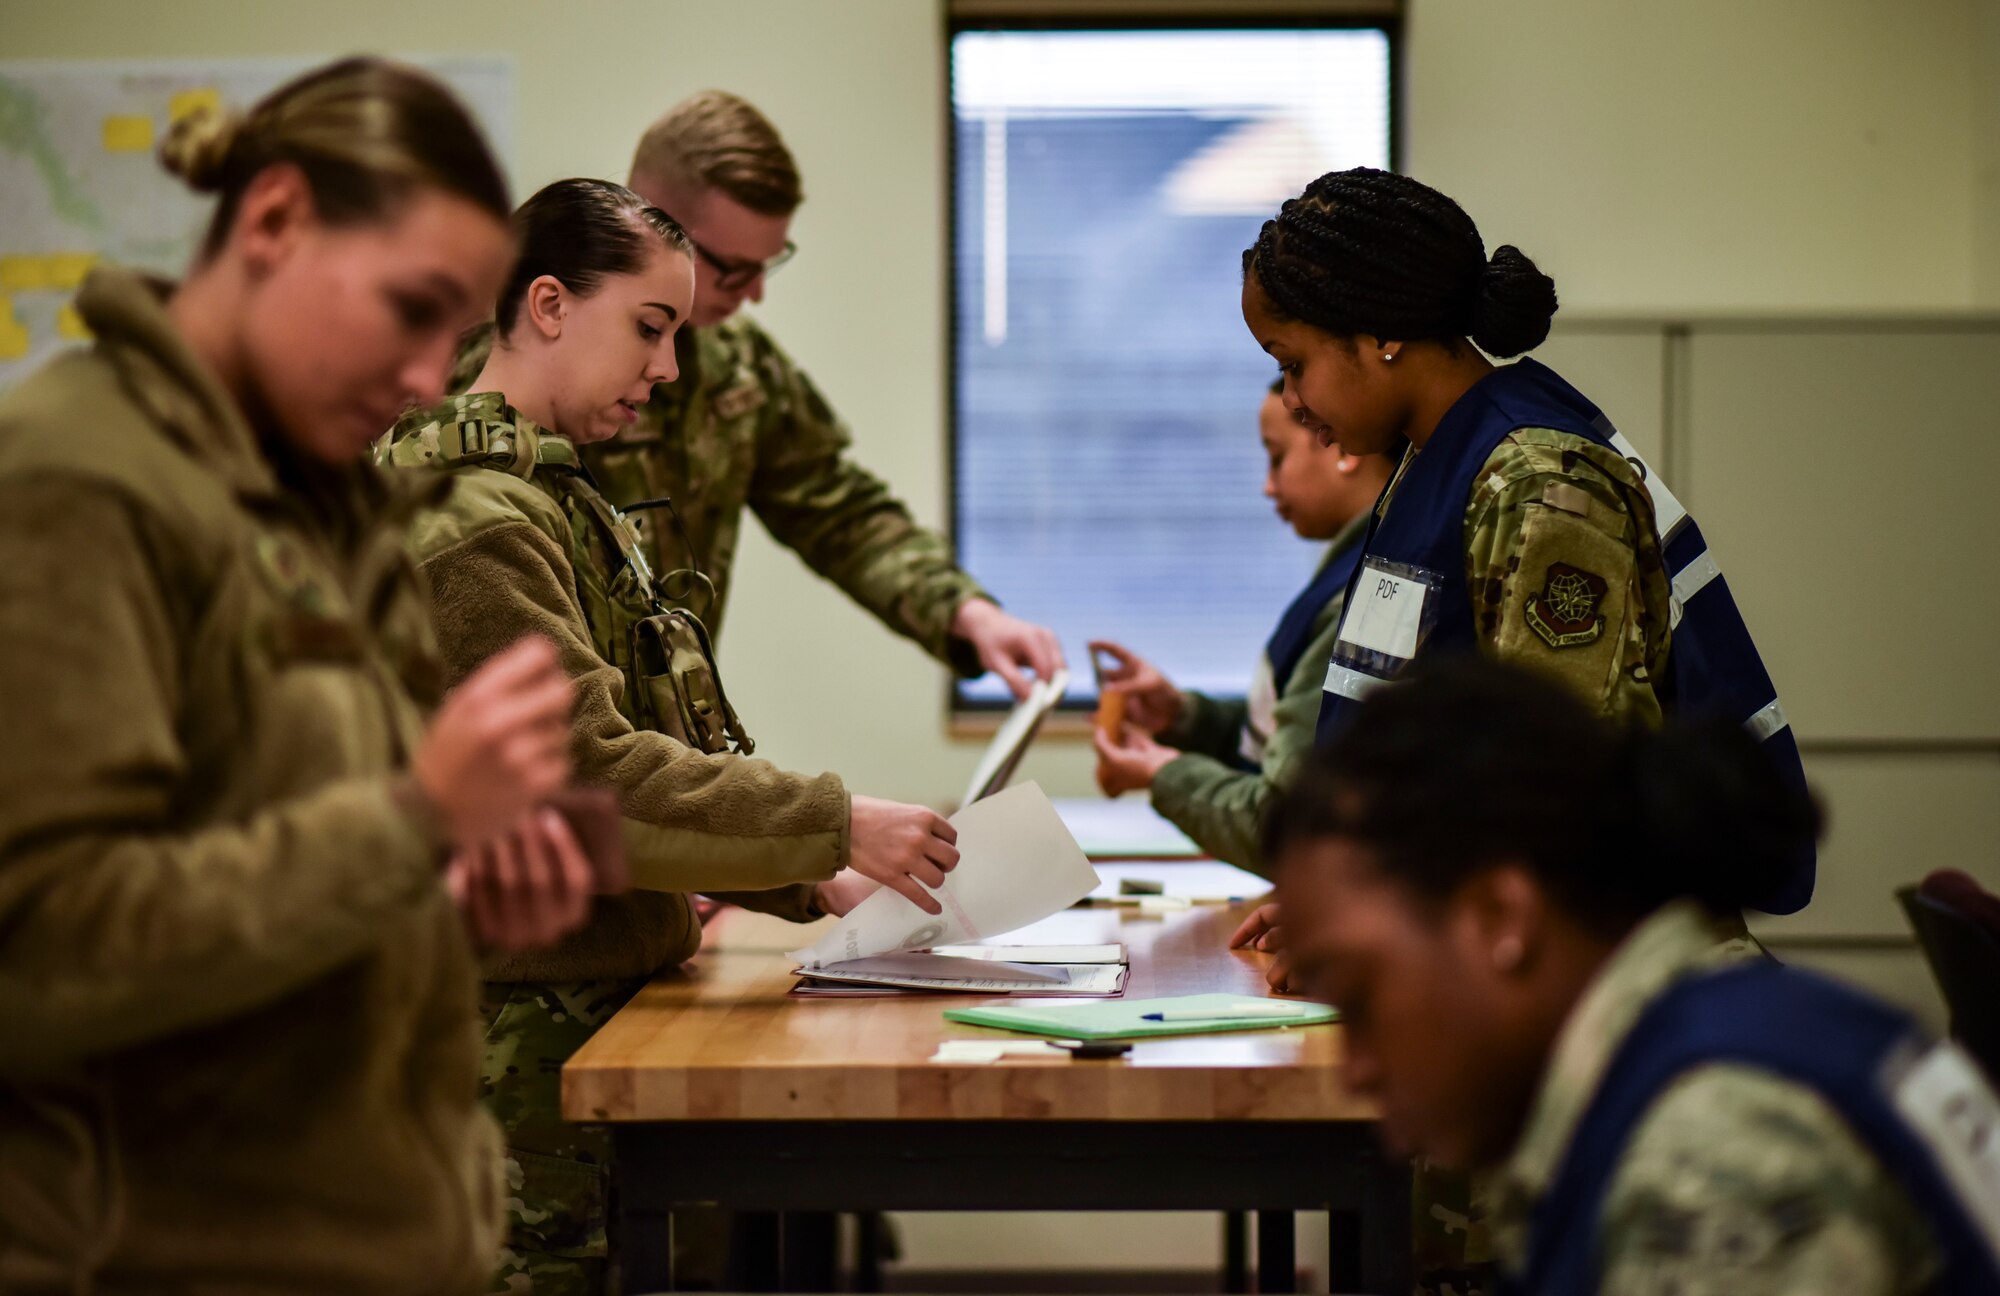 Team Fairchild Airmen go through the Personnel Deployment Function as they simulate a deployment during Exercise Global Thunder at Fairchild Air Force Base, Washington, Oct. 23, 2019. Global Thunder is a U.S. Strategic Command exercise designed to ensure an efficient mission response by testing Airmen’s ability to execute command, control and operational procedures during simulated combat scenarios. (U.S. Air Force photo by Staff Sgt. Dustin Mullen)